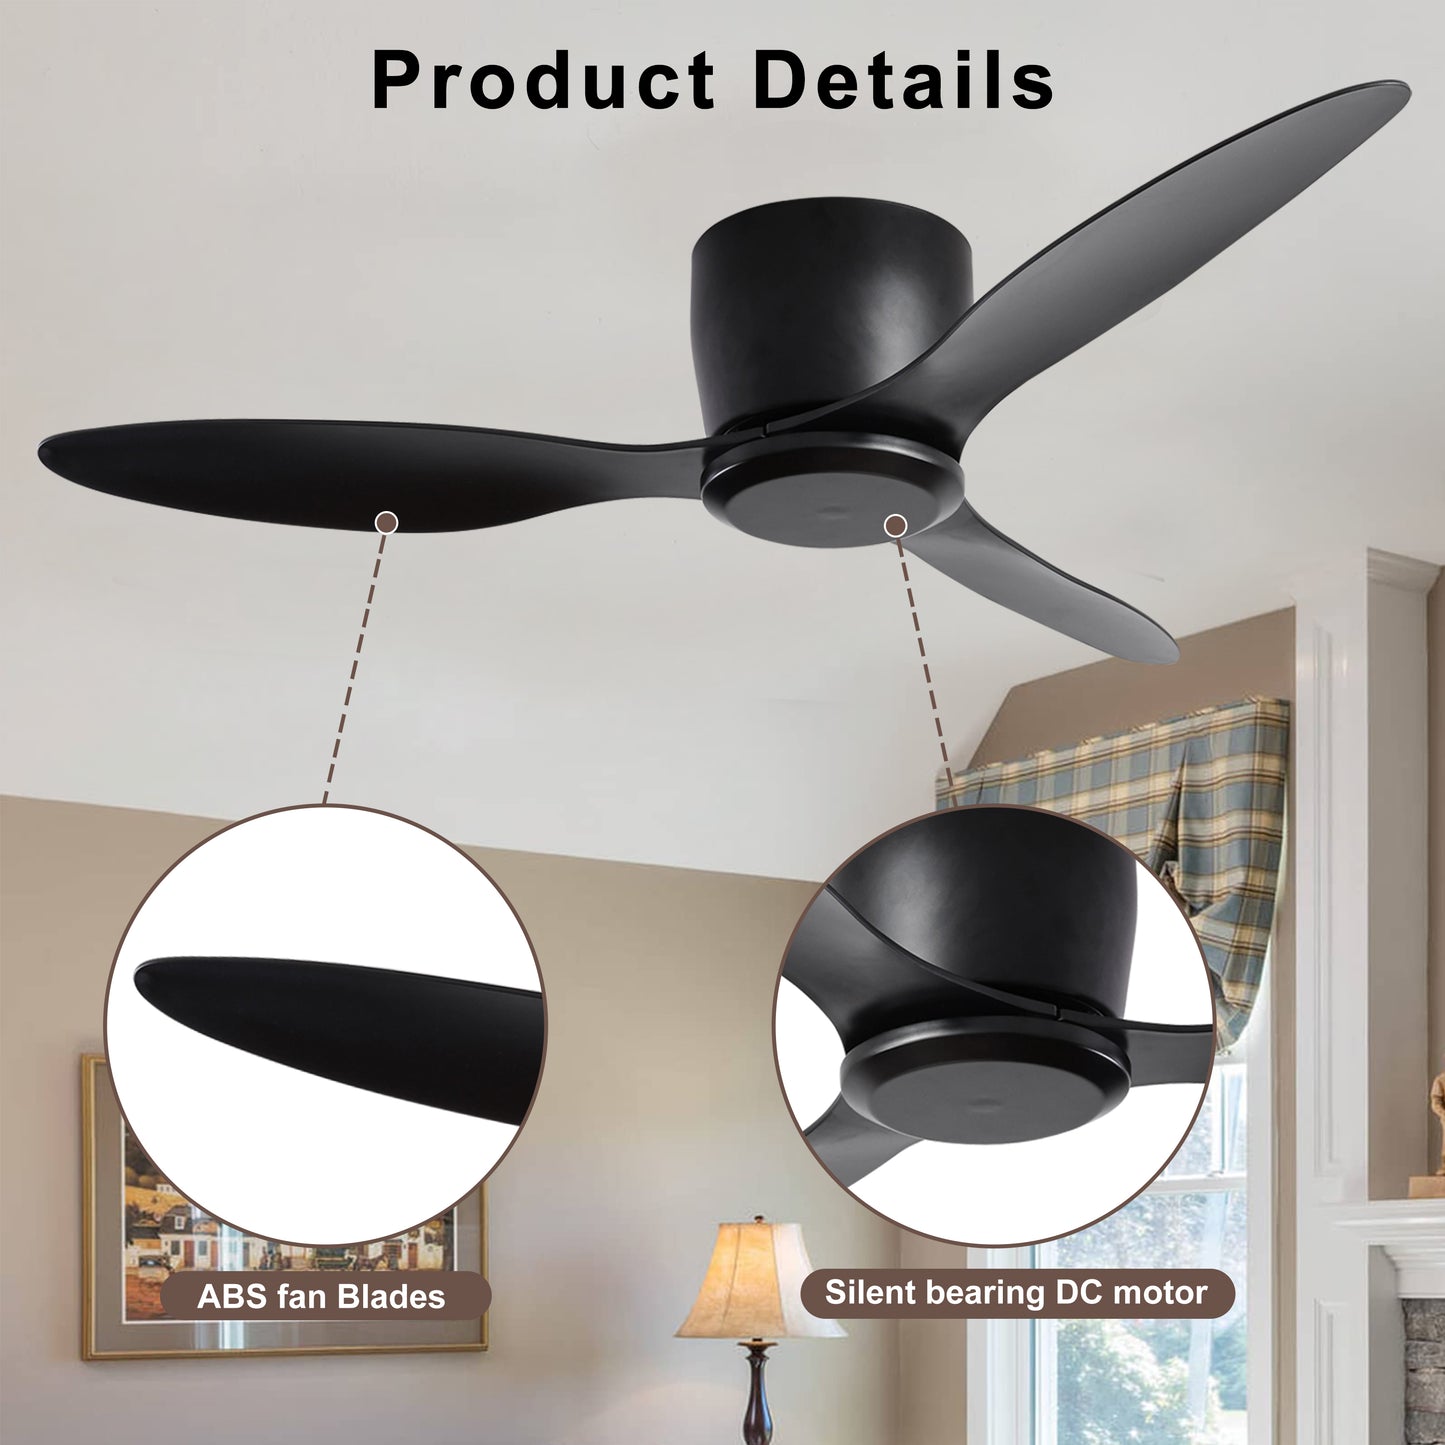 52 Black Ceiling Fan with Remote Control and Reversible DC Motor - Modern Design No Lights for Various Living Spaces